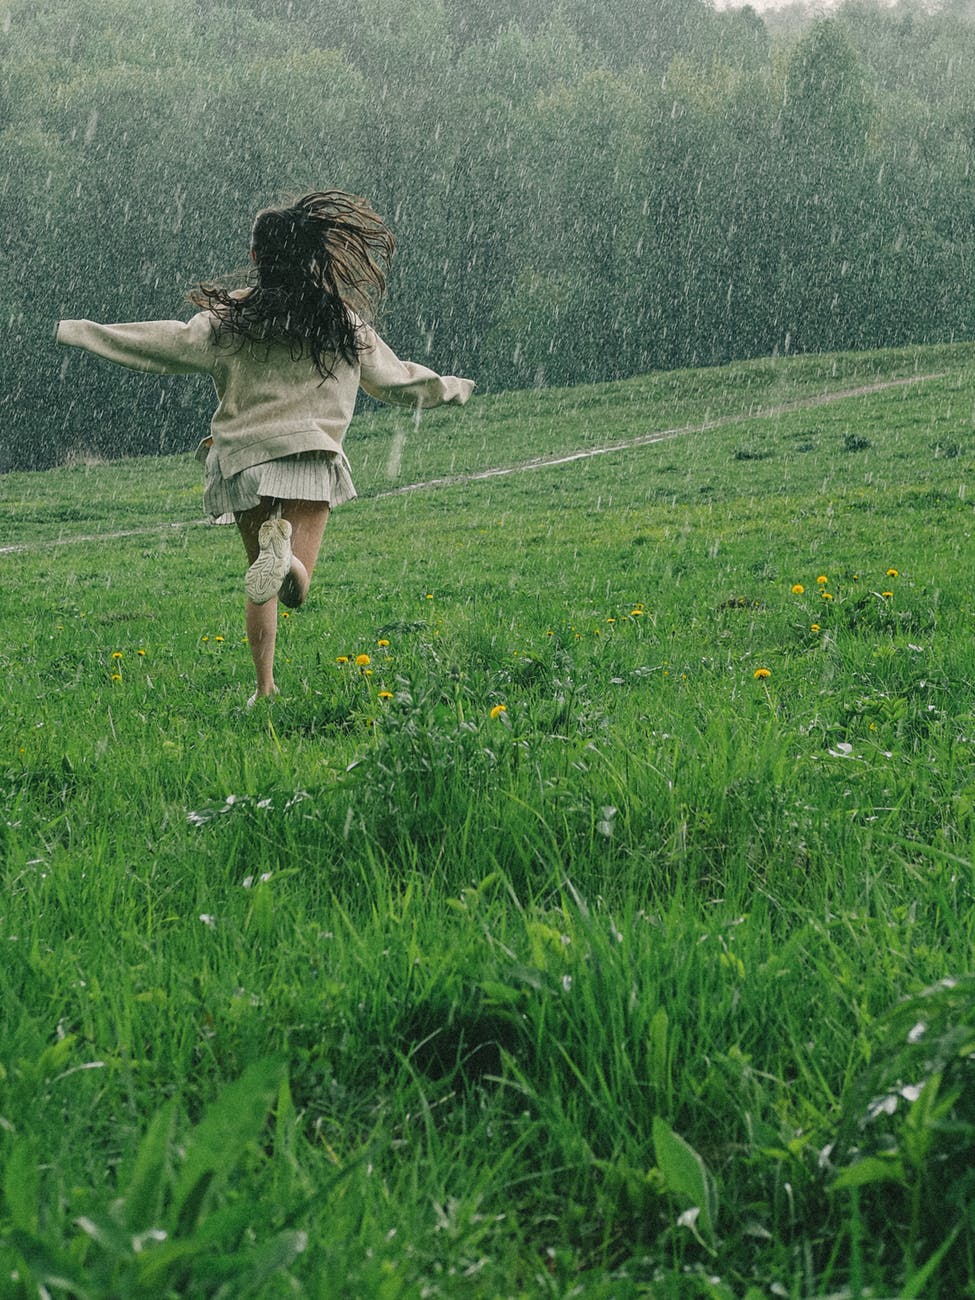 a person running in a grass field while raining